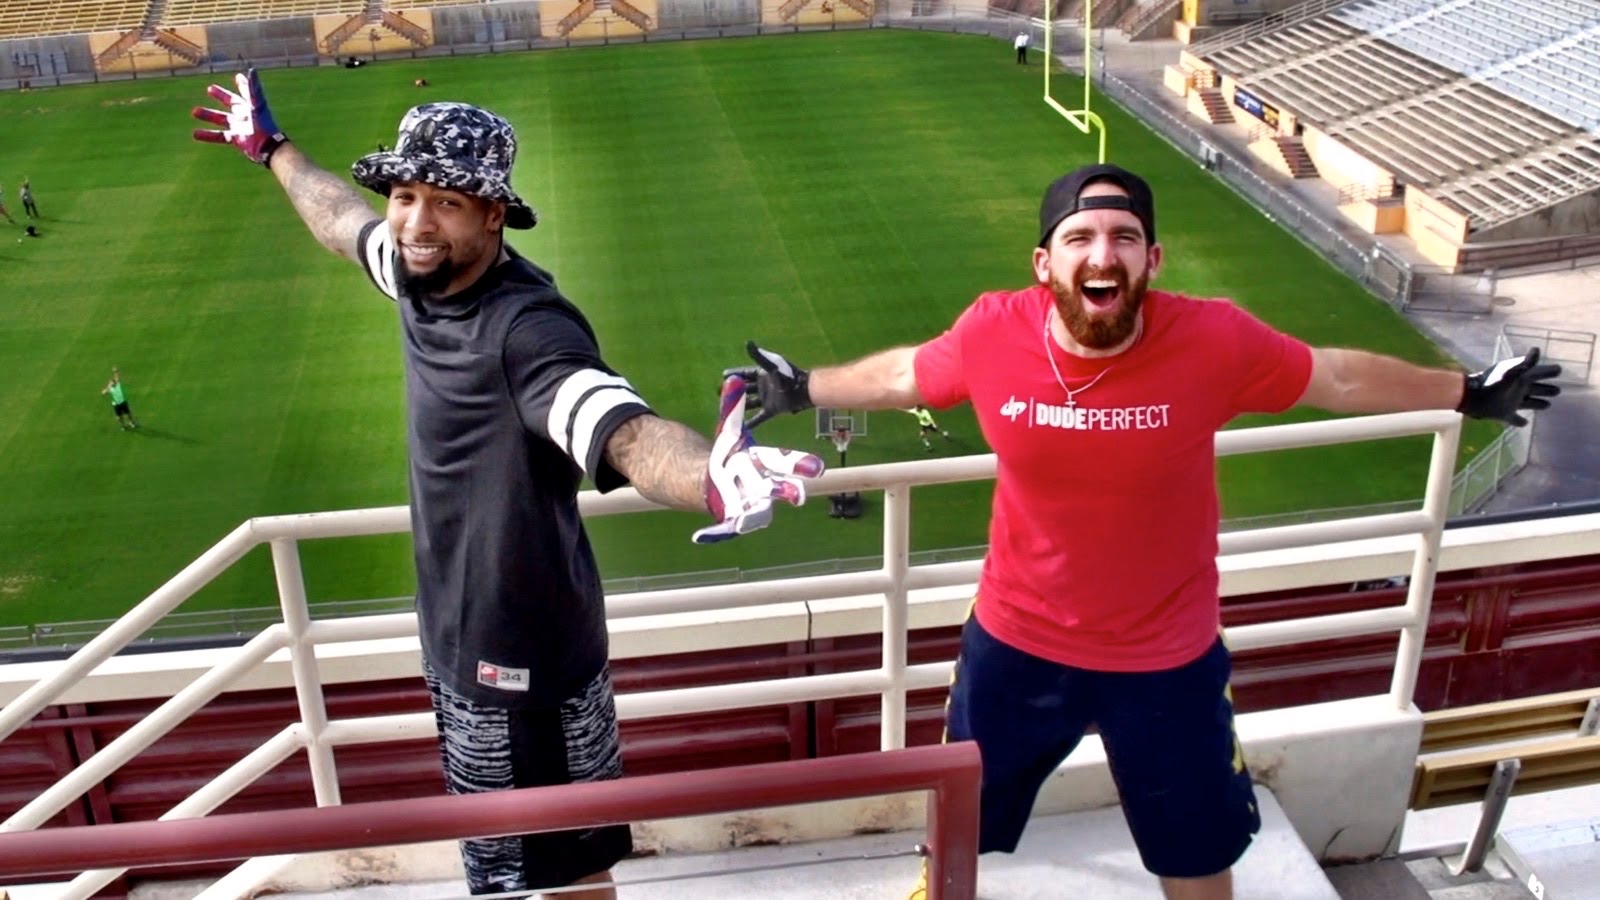 Facts You May Not Know About Dude Perfect